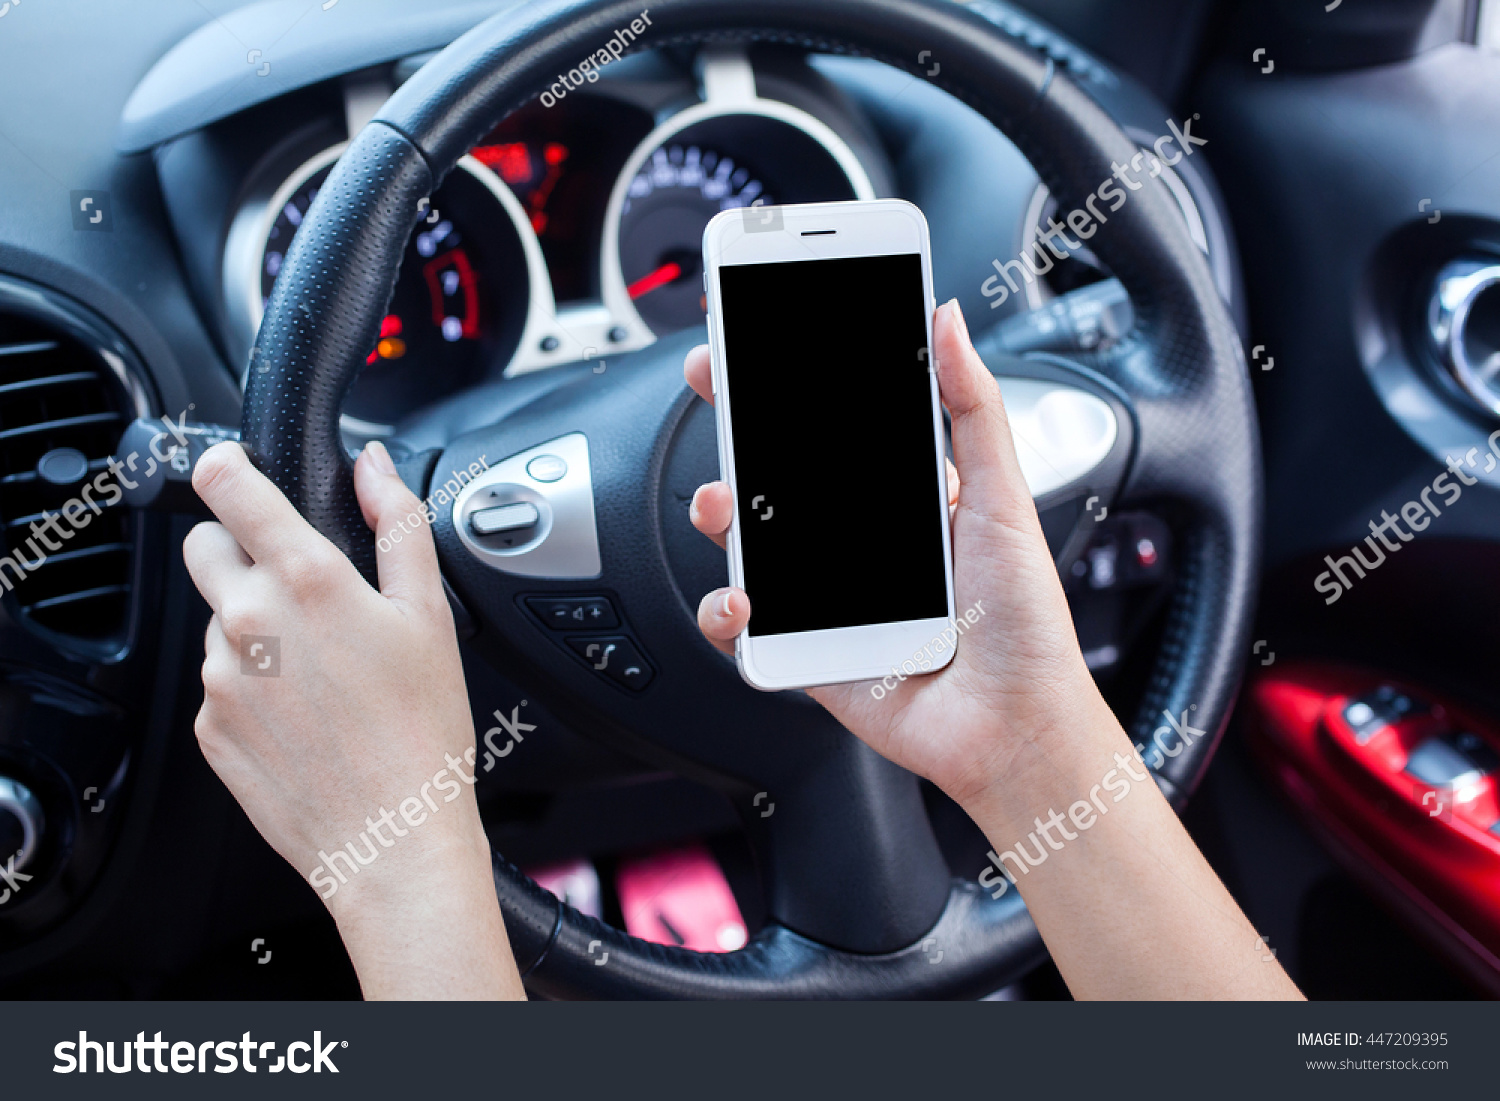 woman driver using smart phone in car, blank screen for text and content
 #447209395